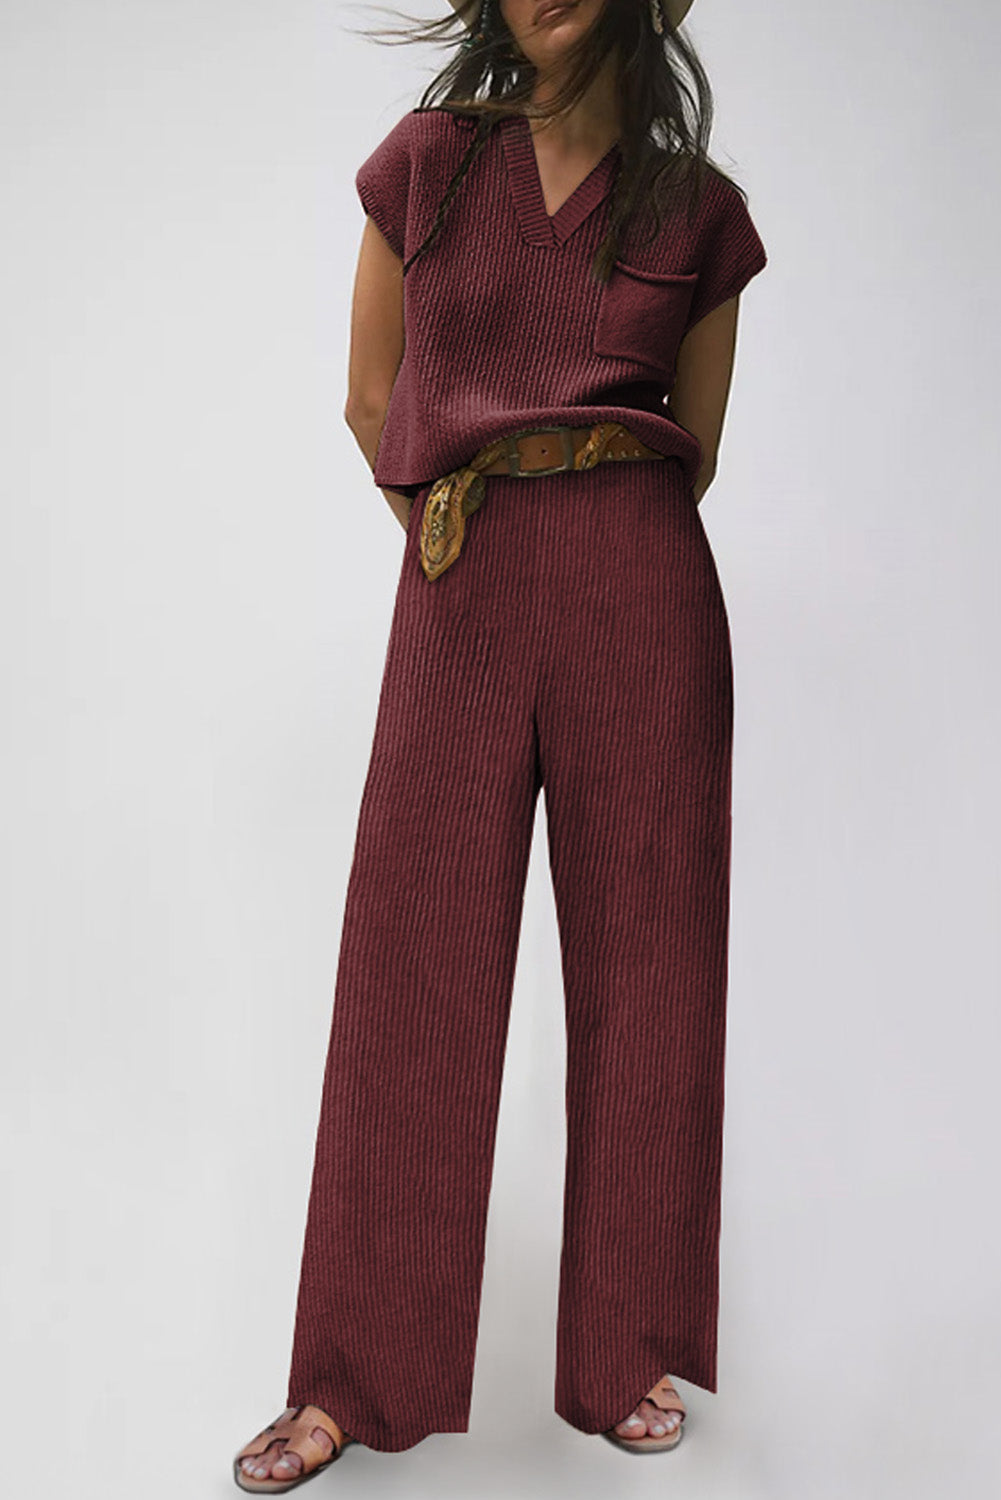 Fiery Red Knitted V Neck Sweater and Casual Pants Set